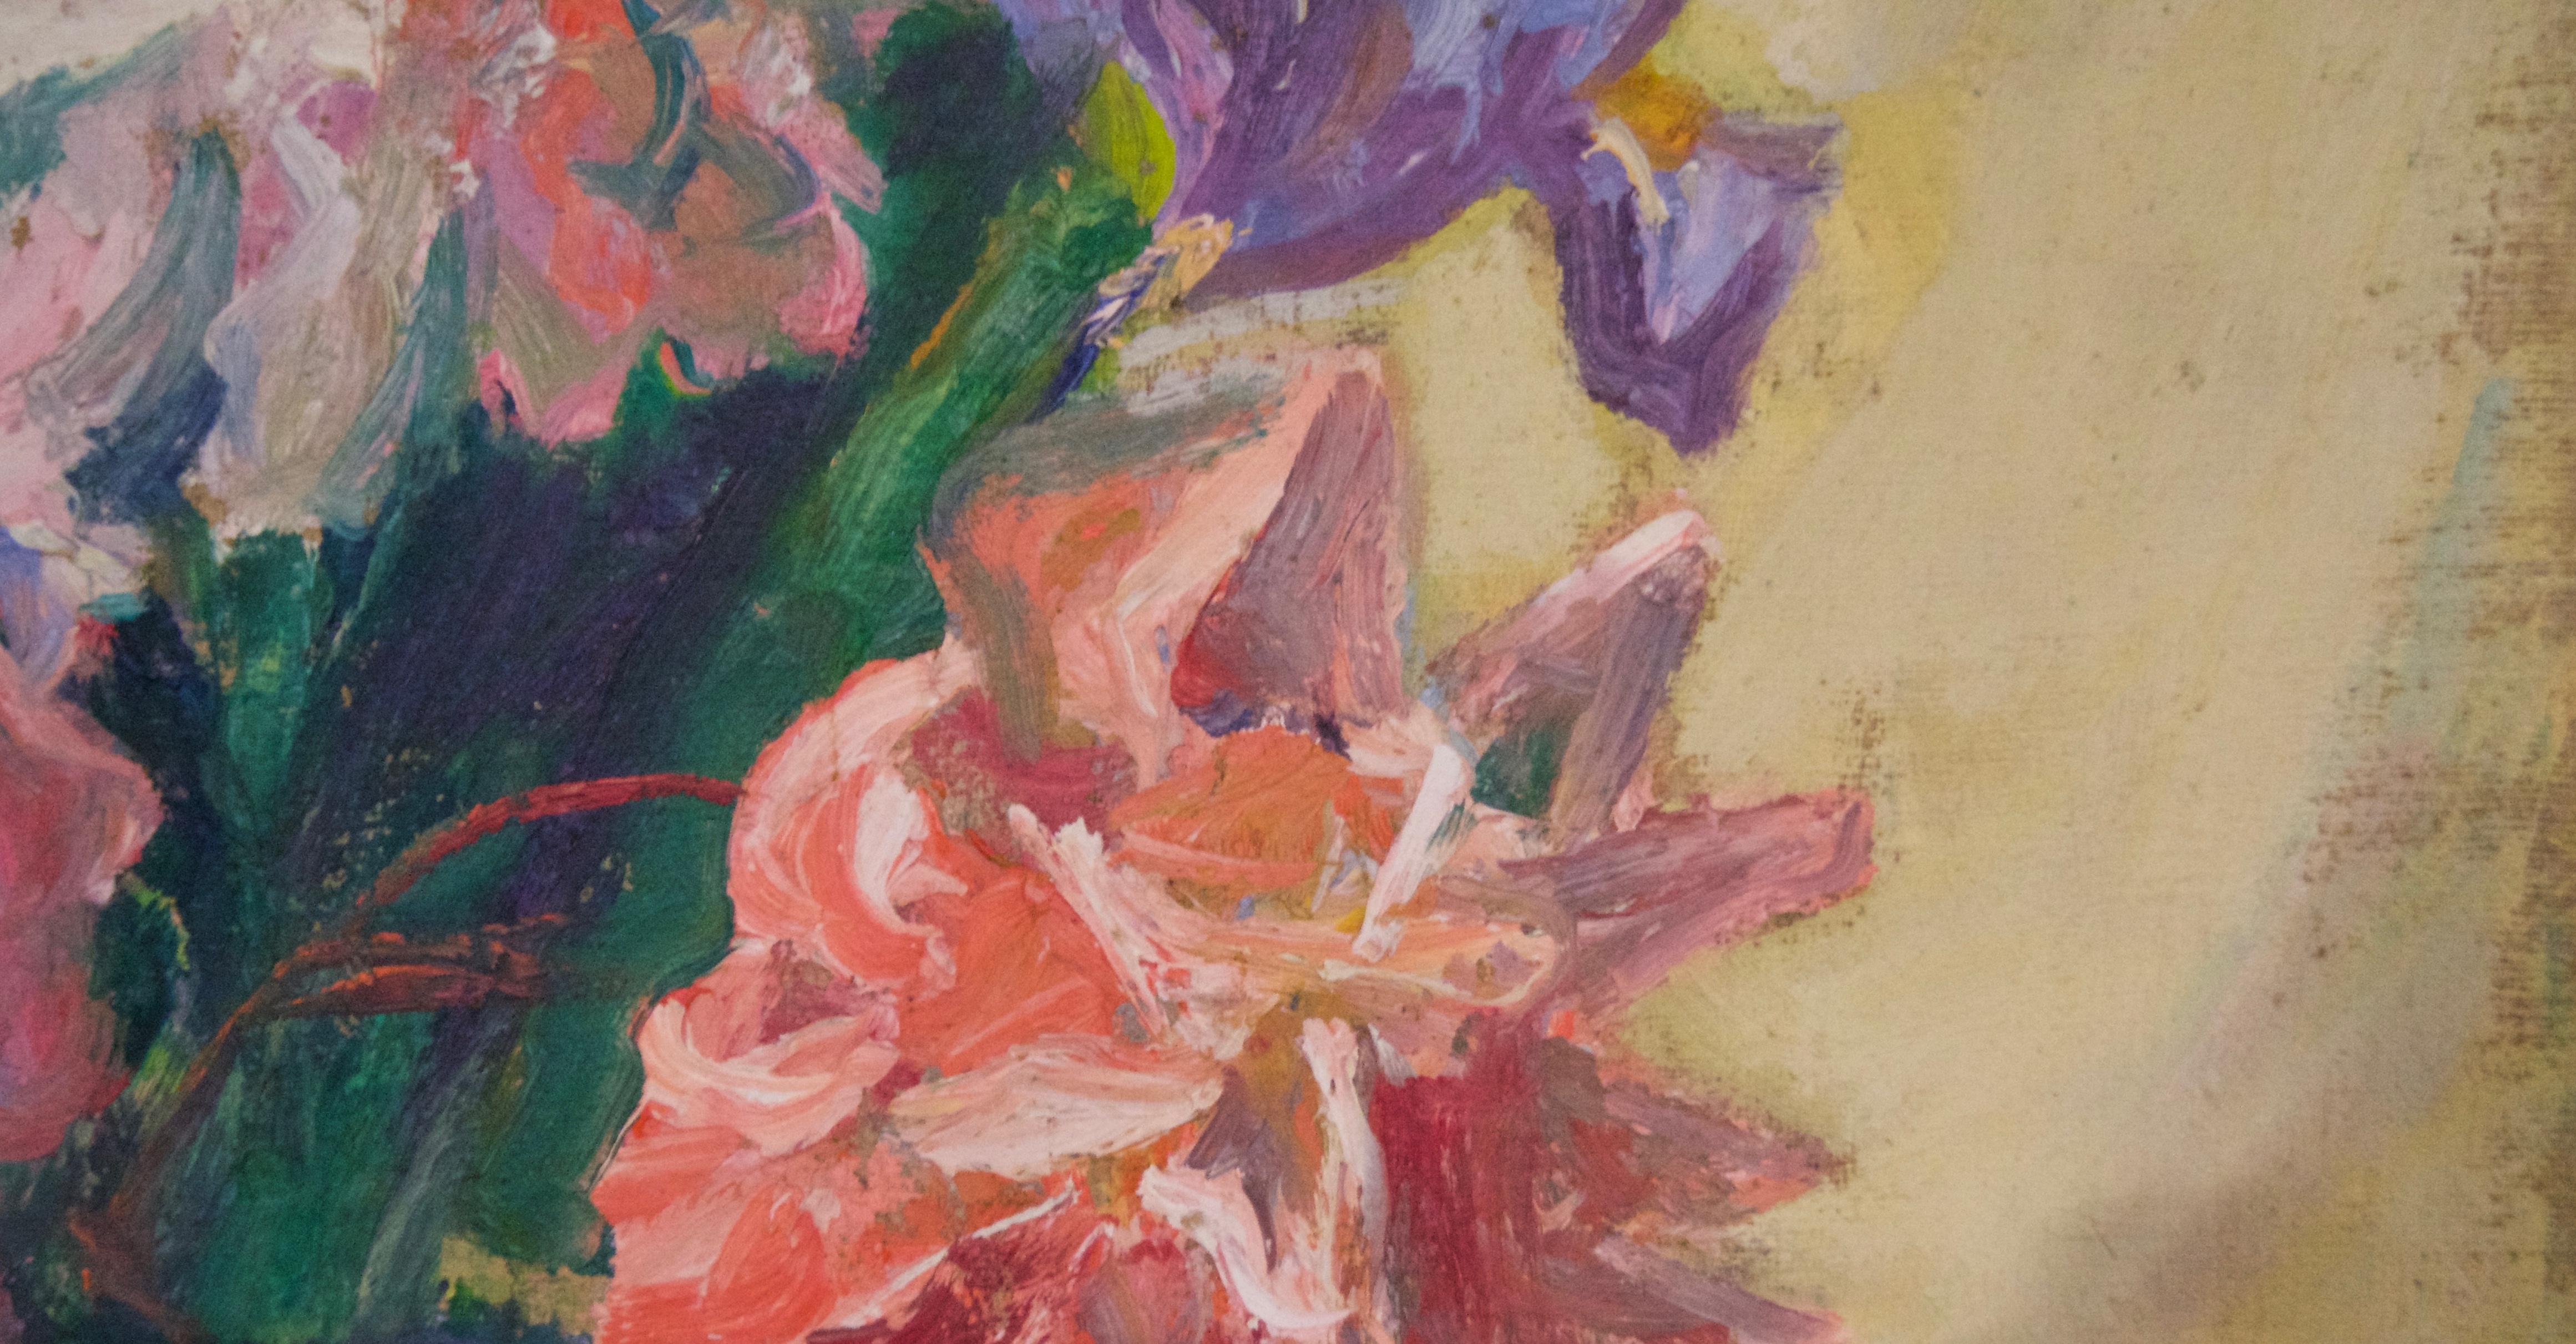 Still Life Flowers - Early 20th Century Oil on Canvas by E C Fisher Clay - Post-Impressionist Painting by Elizabeth Campbell Fisher Clay